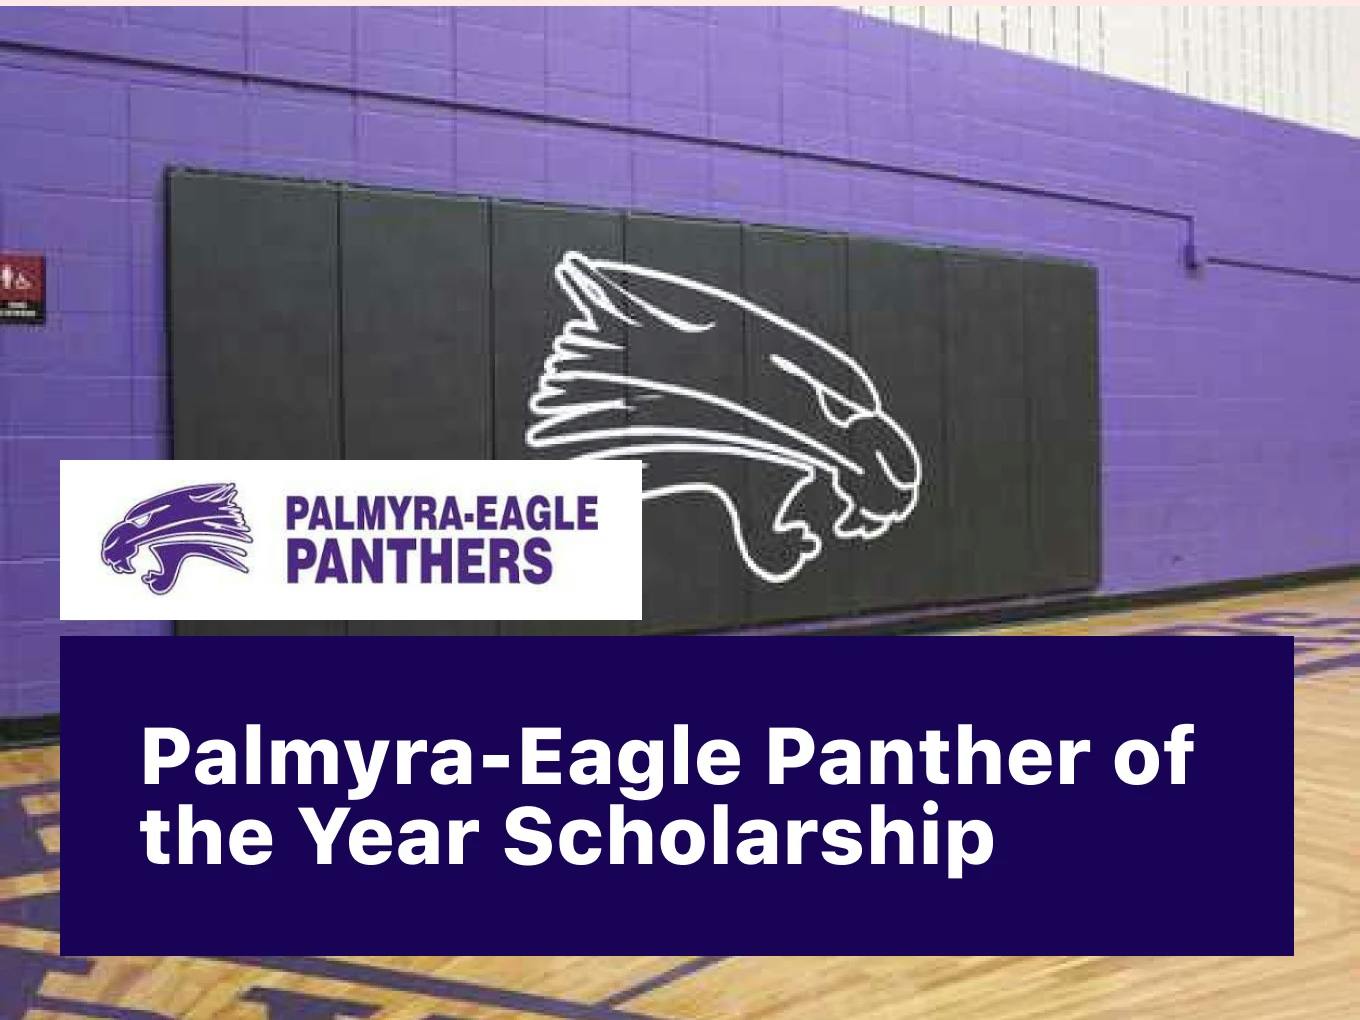 Palmyra-Eagle Panther of the Year Scholarship